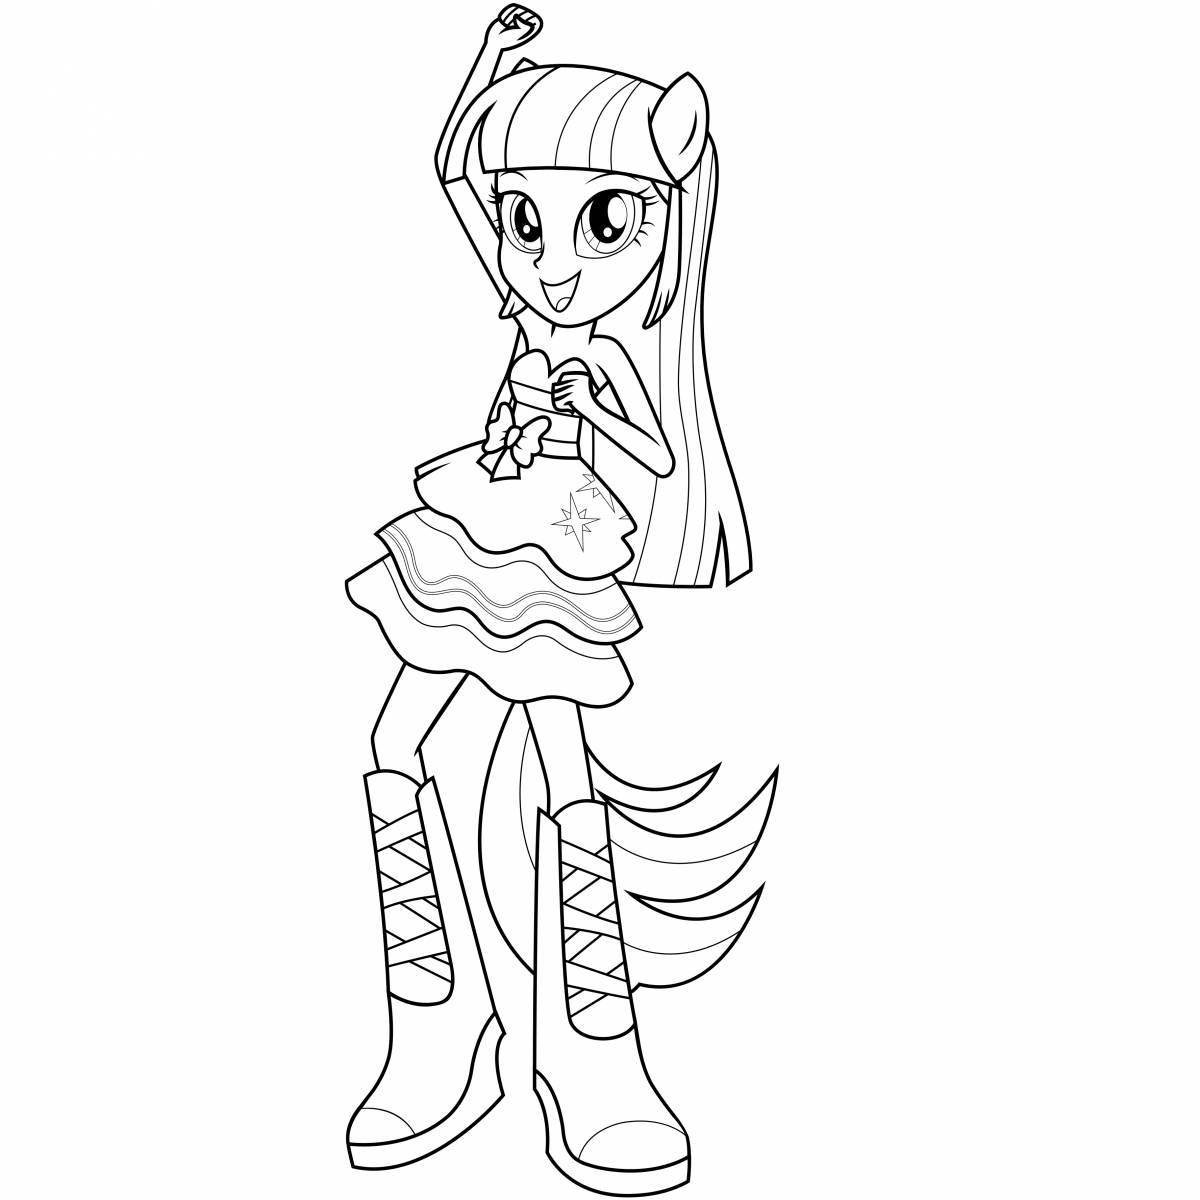 Colorific coloring page pony my little pony equestria